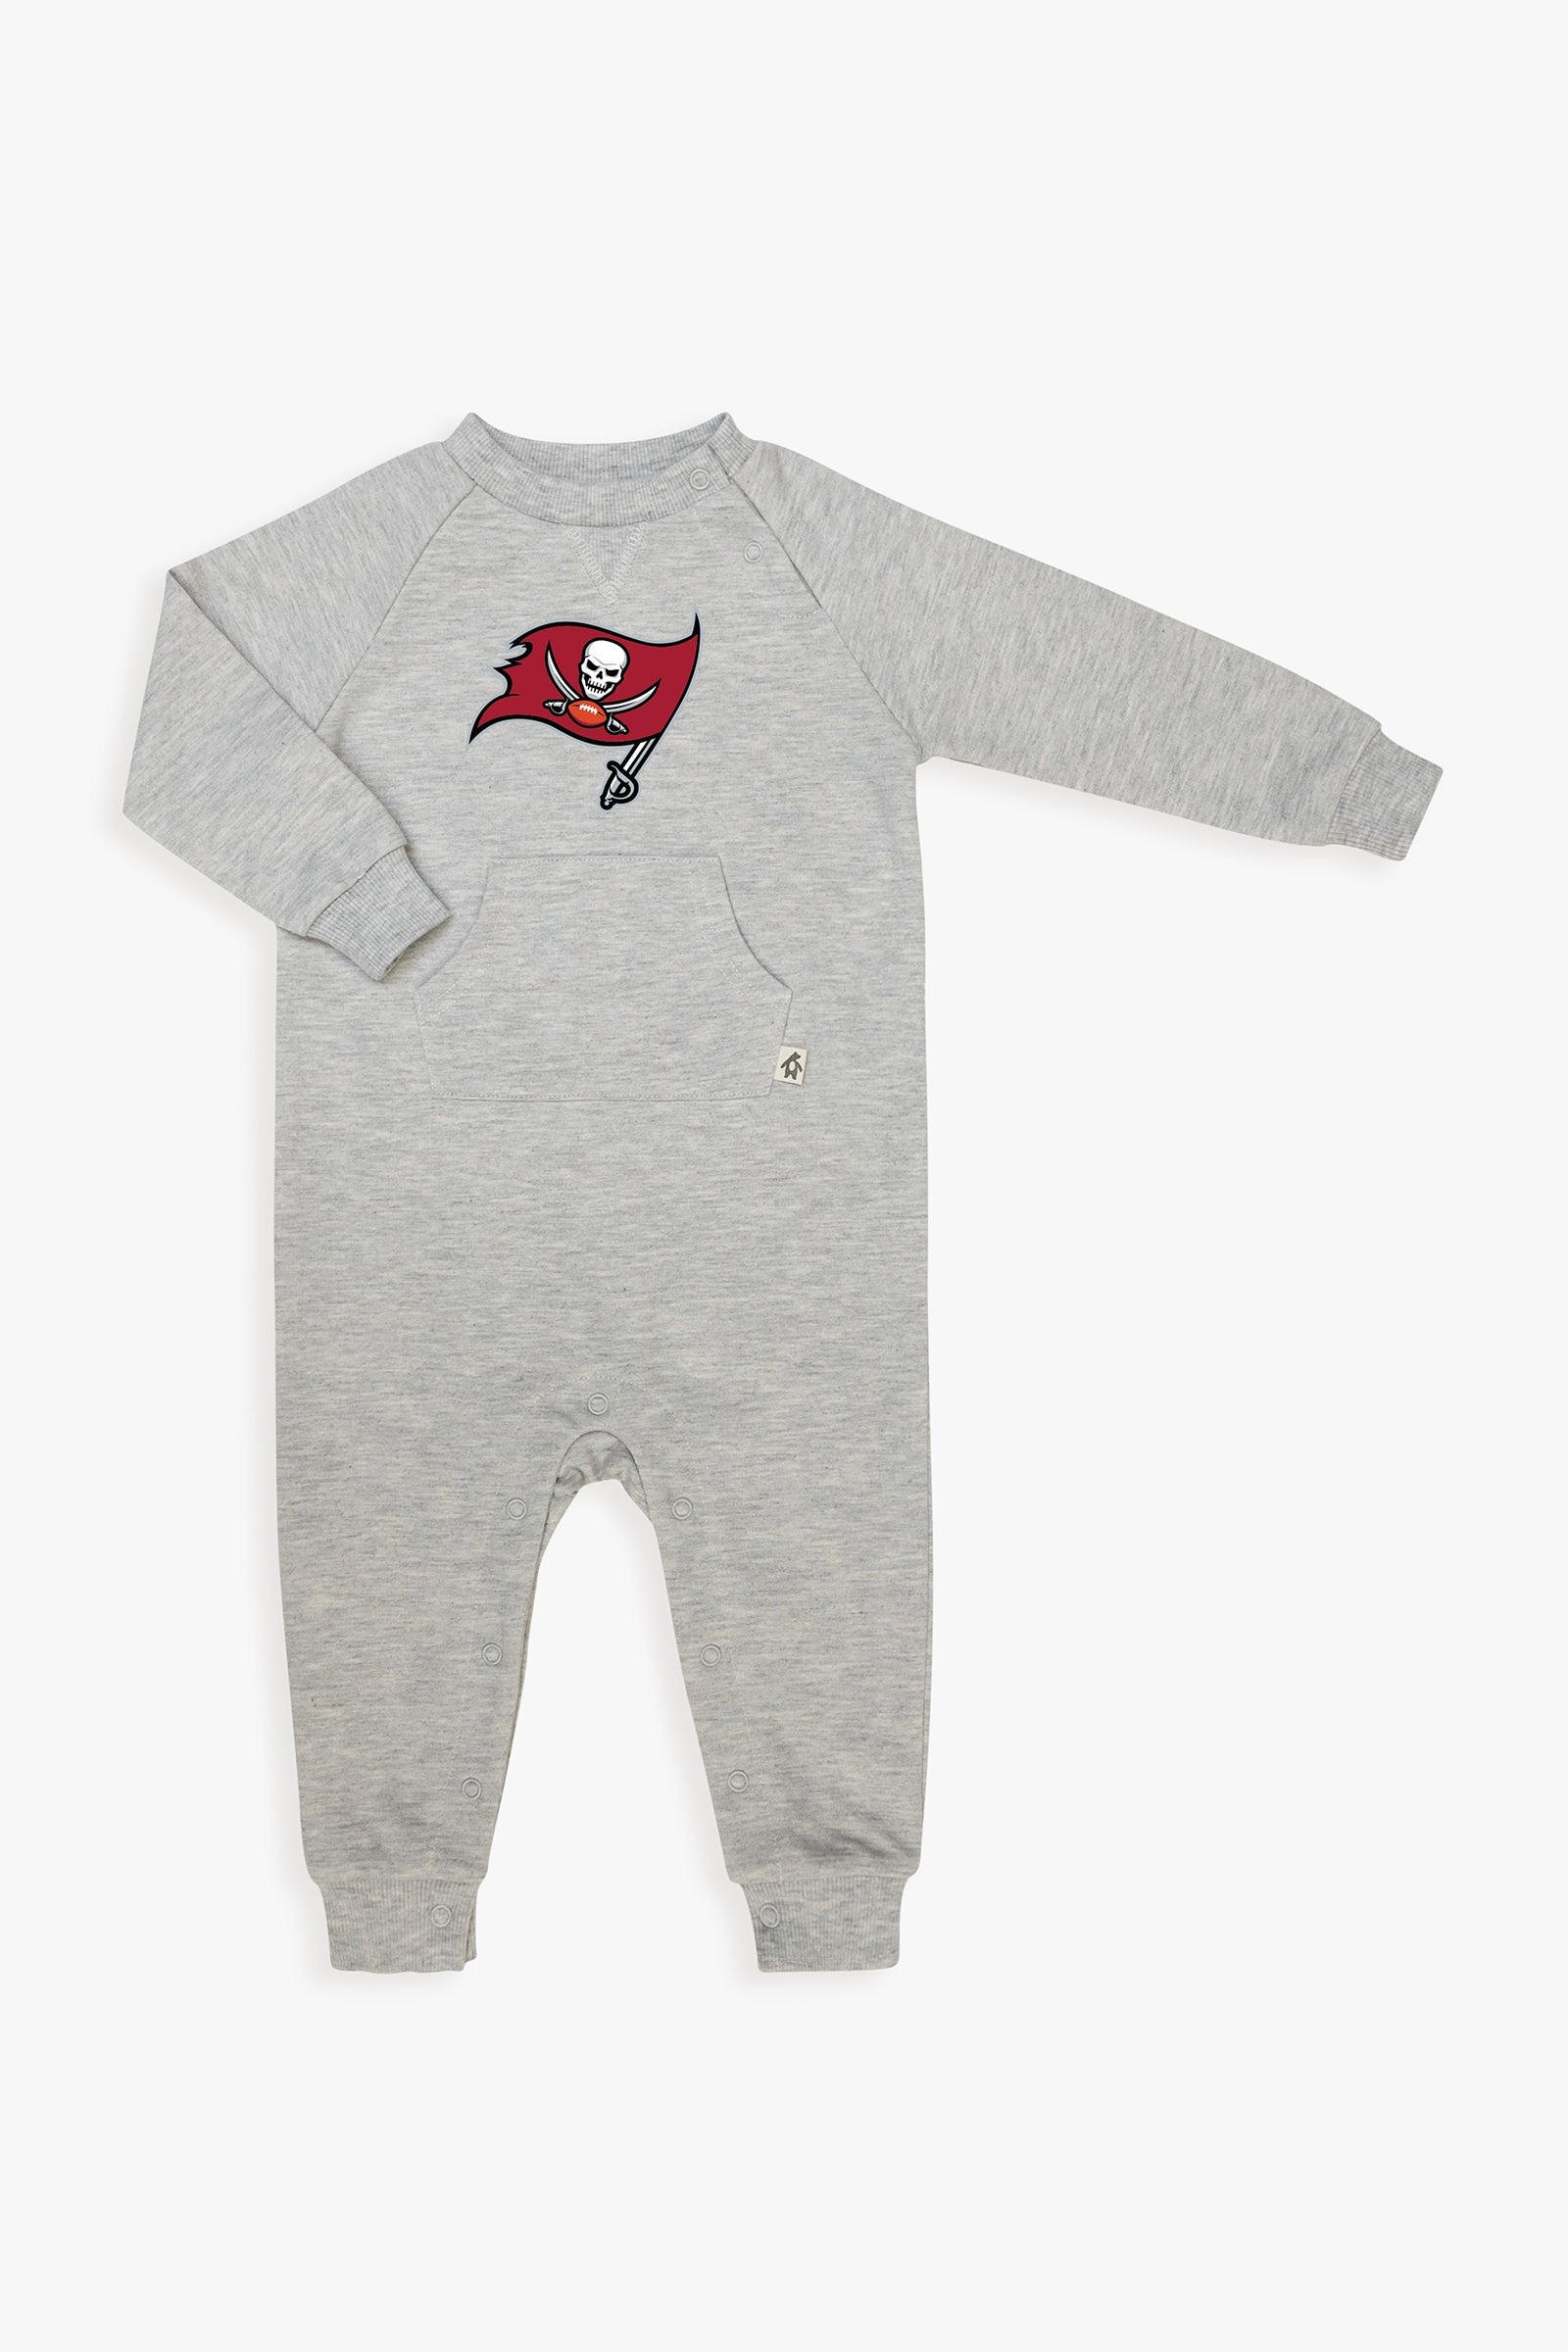 NFL Baby French Terry Jumpsuit in Grey